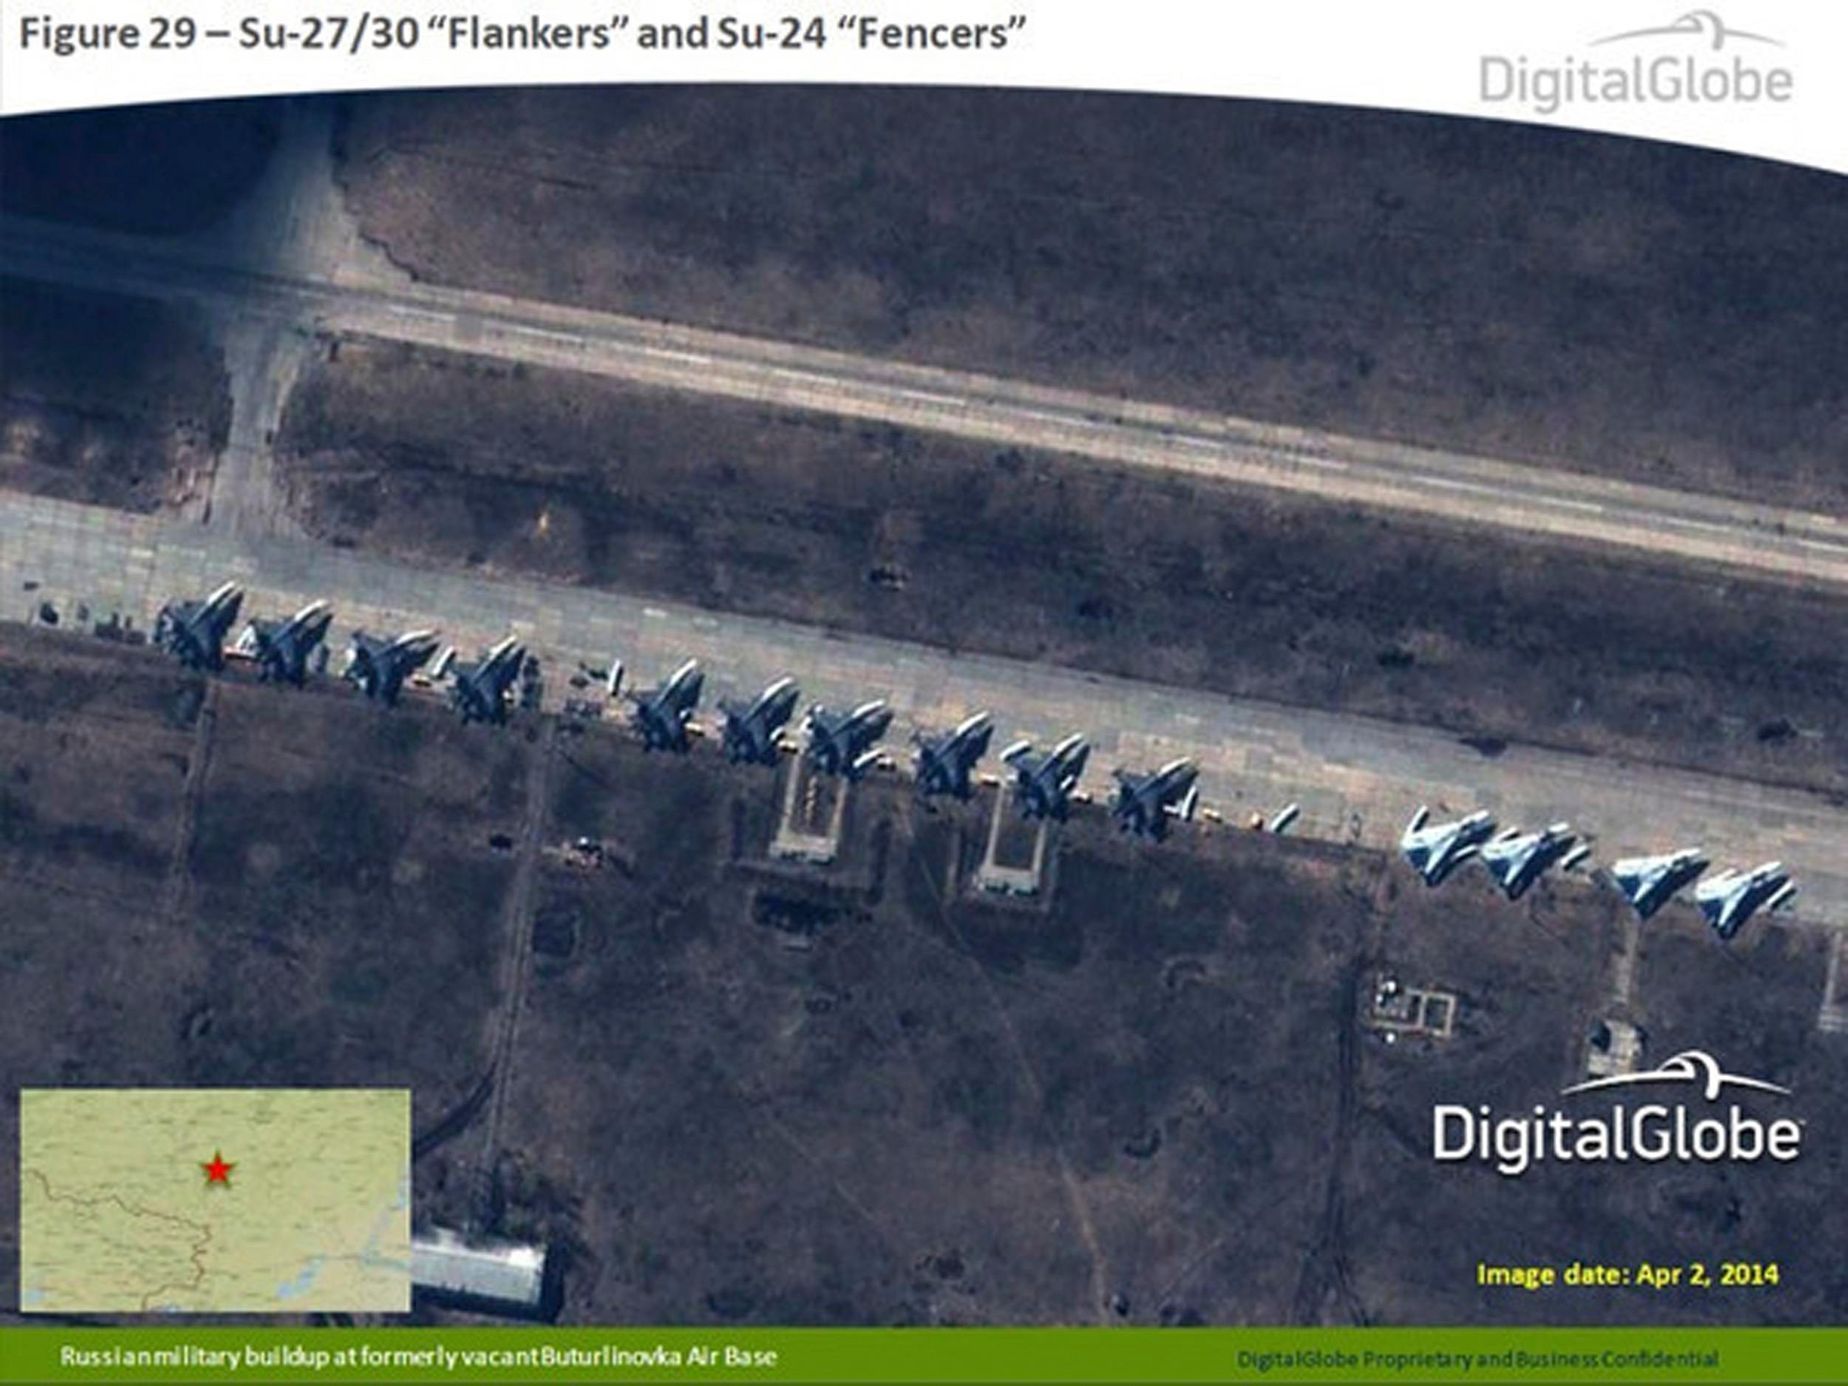 A satellite image provided to Reuters by SHAPE and taken by DigitalGlobe shows what is reported by SHAPE to be Russian Su-27/30 Flankers and Su-24 Fencers at a military base in Buturlinovka